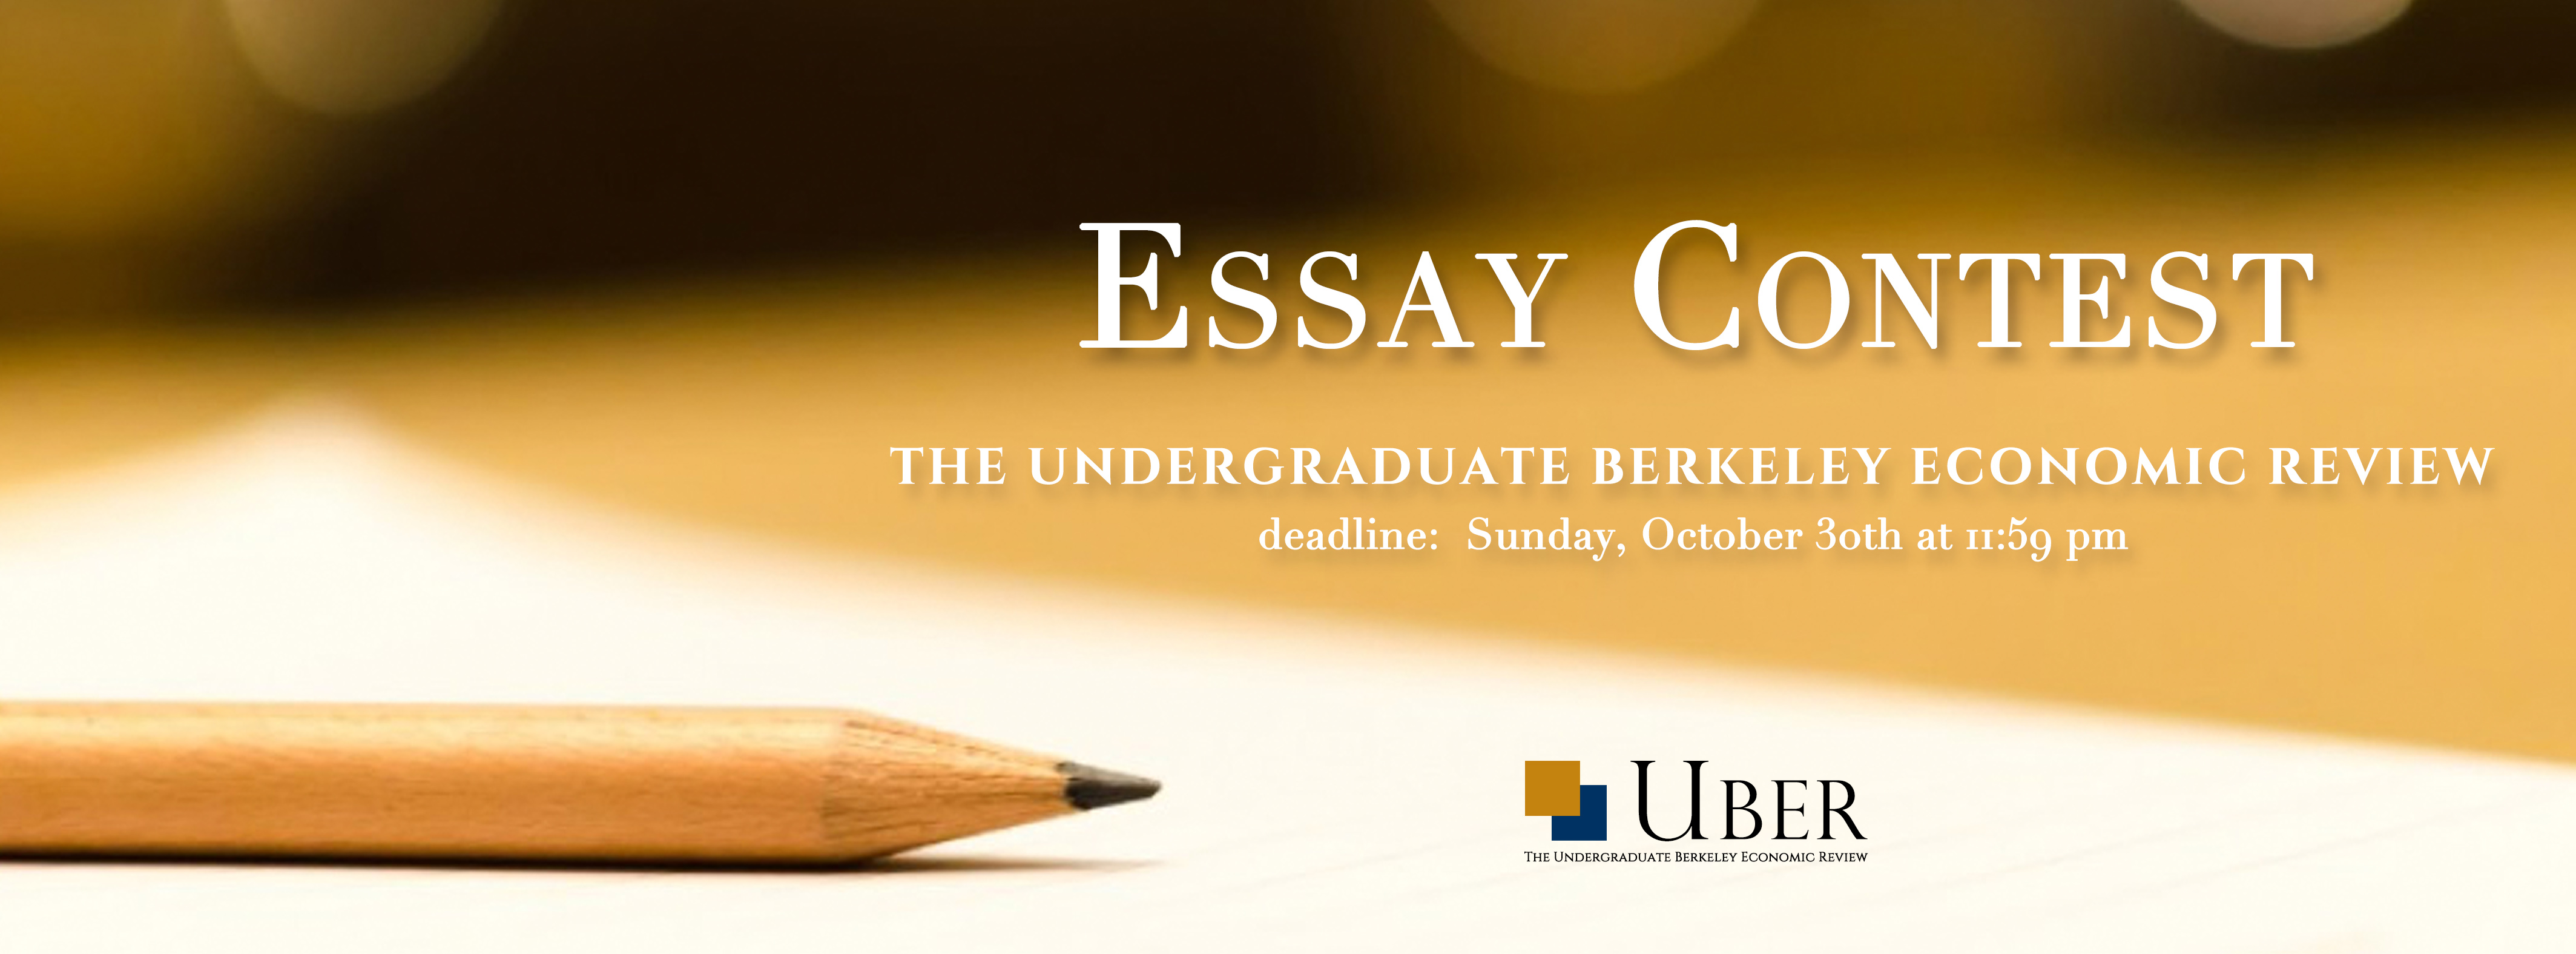 Fall 2016 Essay Contest Launched